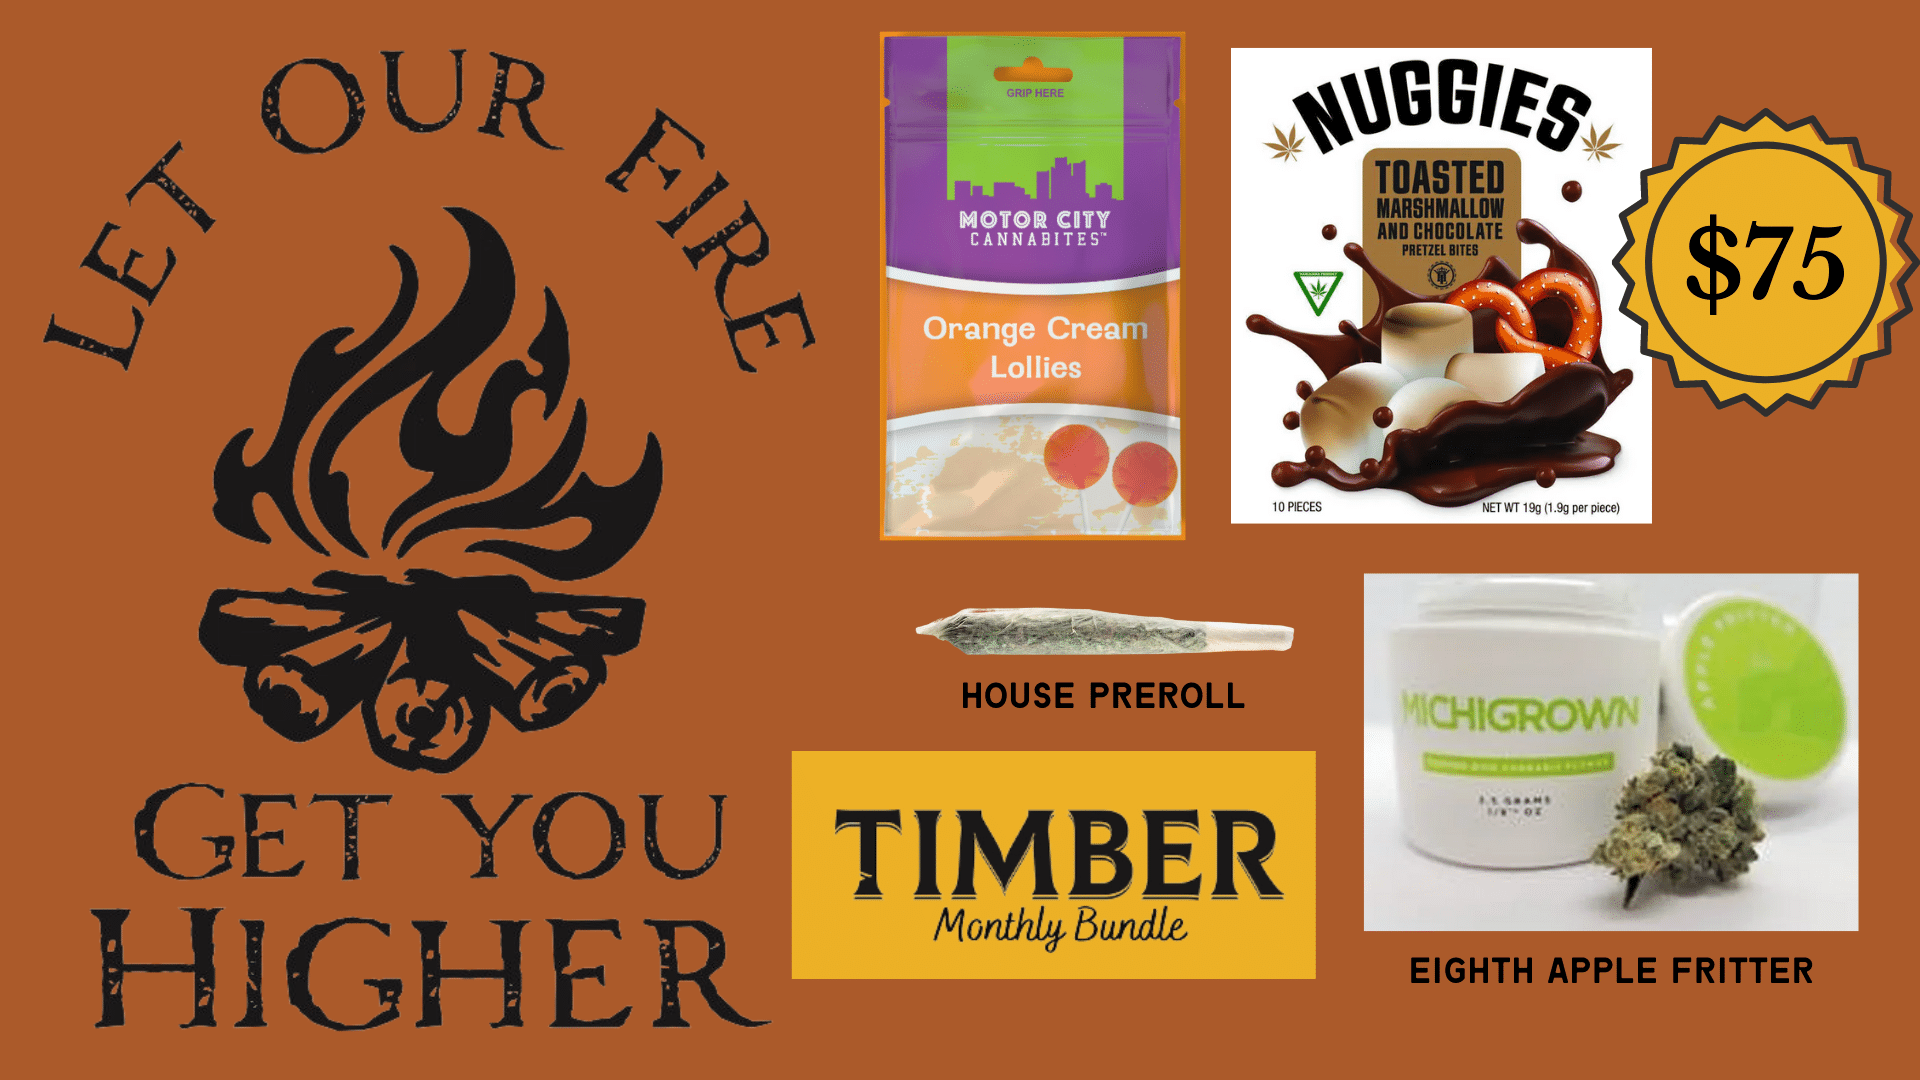 Timber October Bundle: Motor City Lollies, Michigrown Apple Fritter, Toasted Marshmallow Nuggies, House Preroll